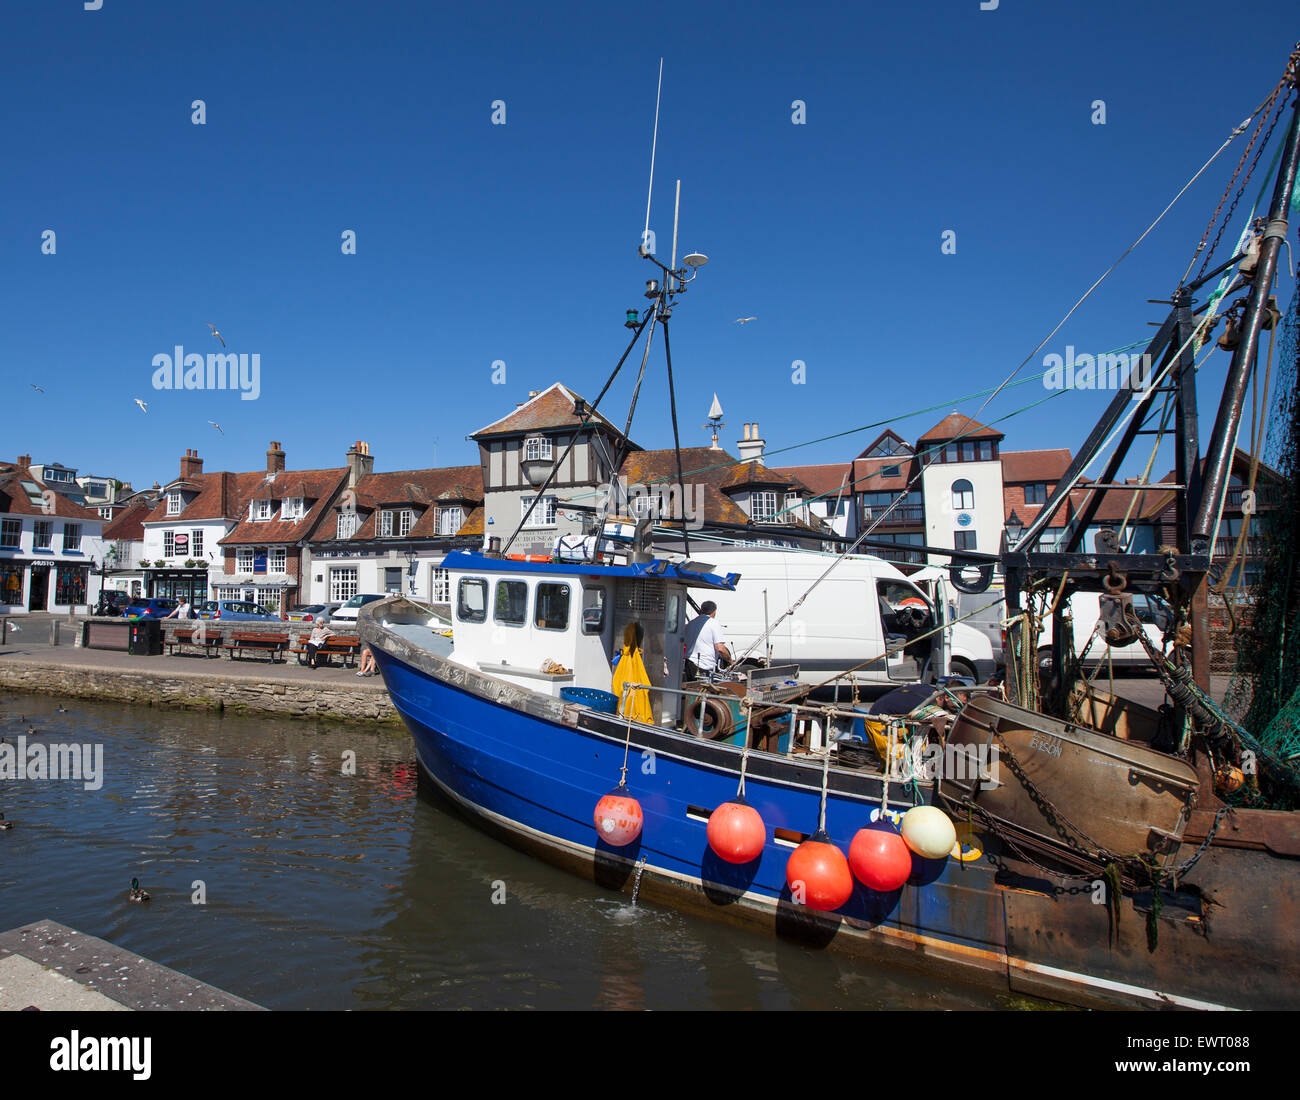 Fishing trawler pictured in Lymington Quay with shops and restaurants in the background Stock Photo